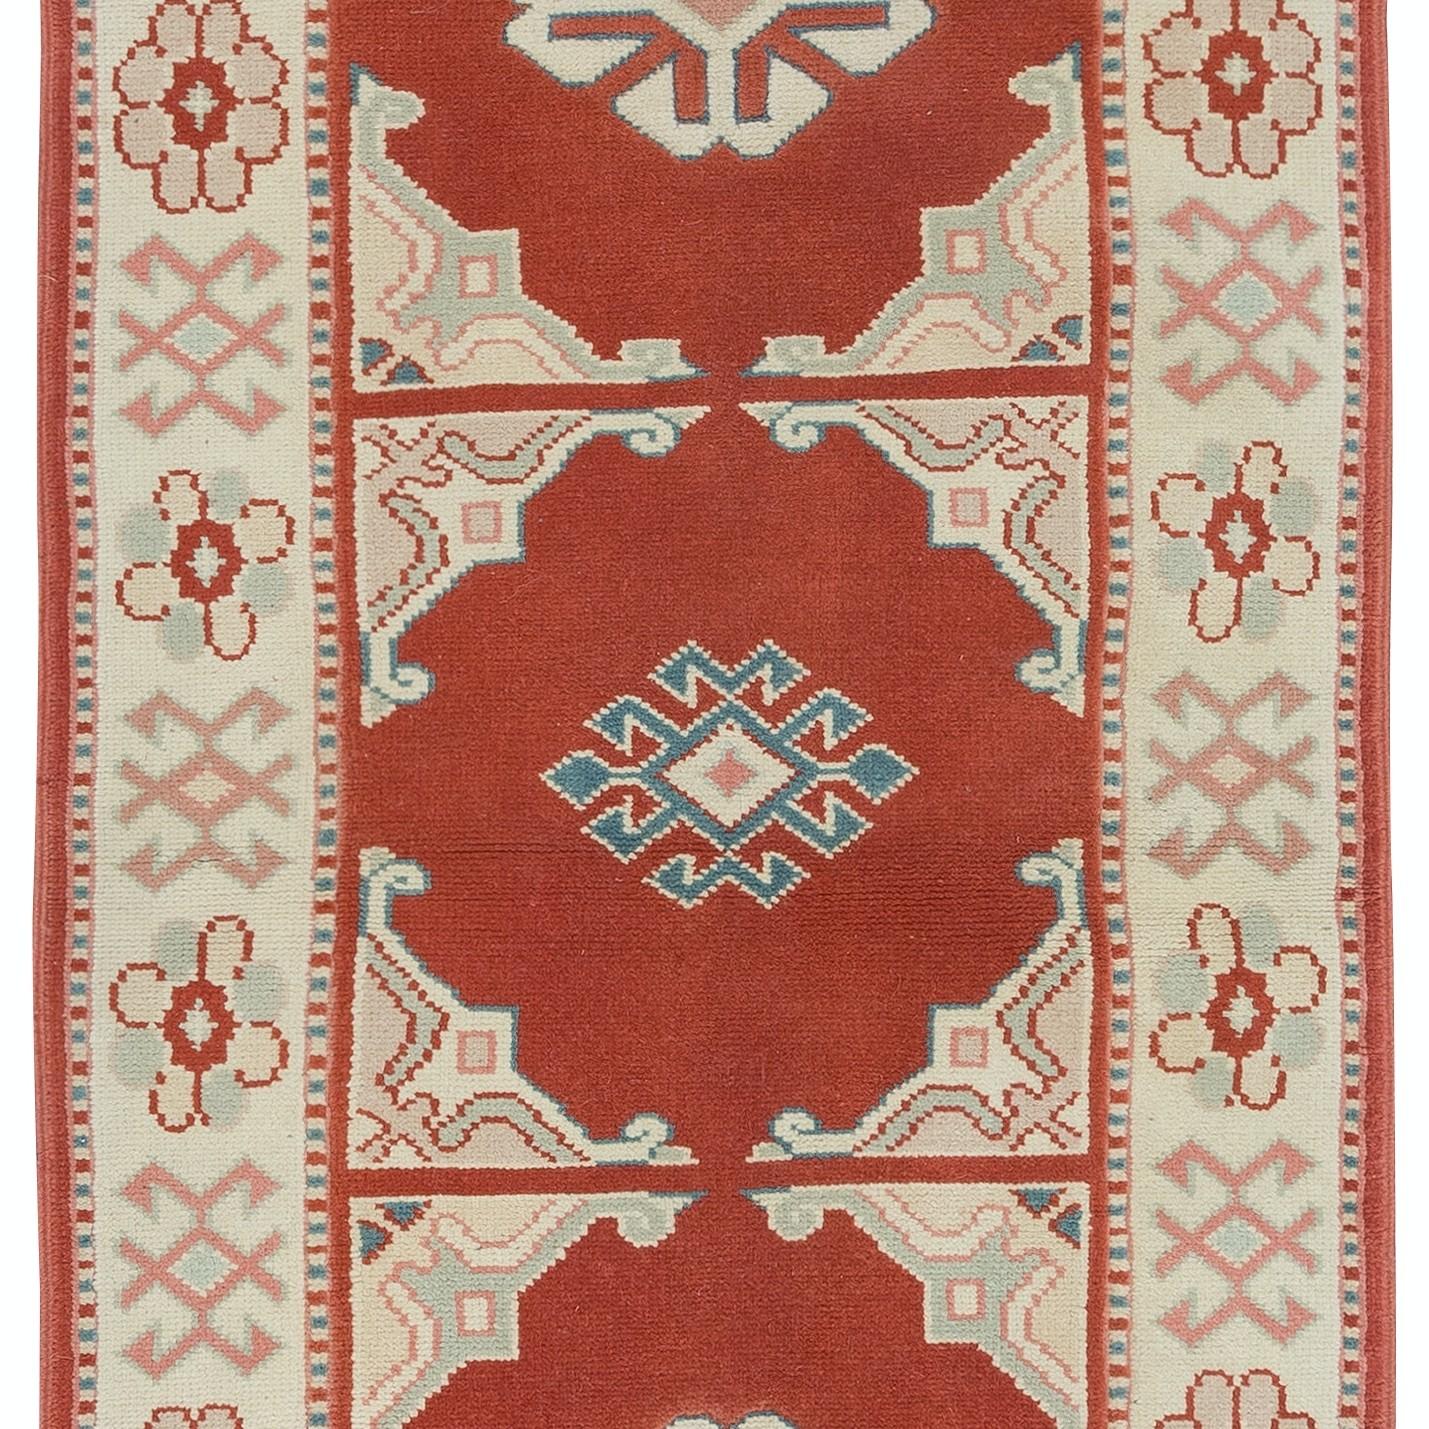 2.5x7.3 Ft One of a Kind Turkish Rug in Red & Beige, Hallway Runner, 100% Wool In Good Condition For Sale In Philadelphia, PA